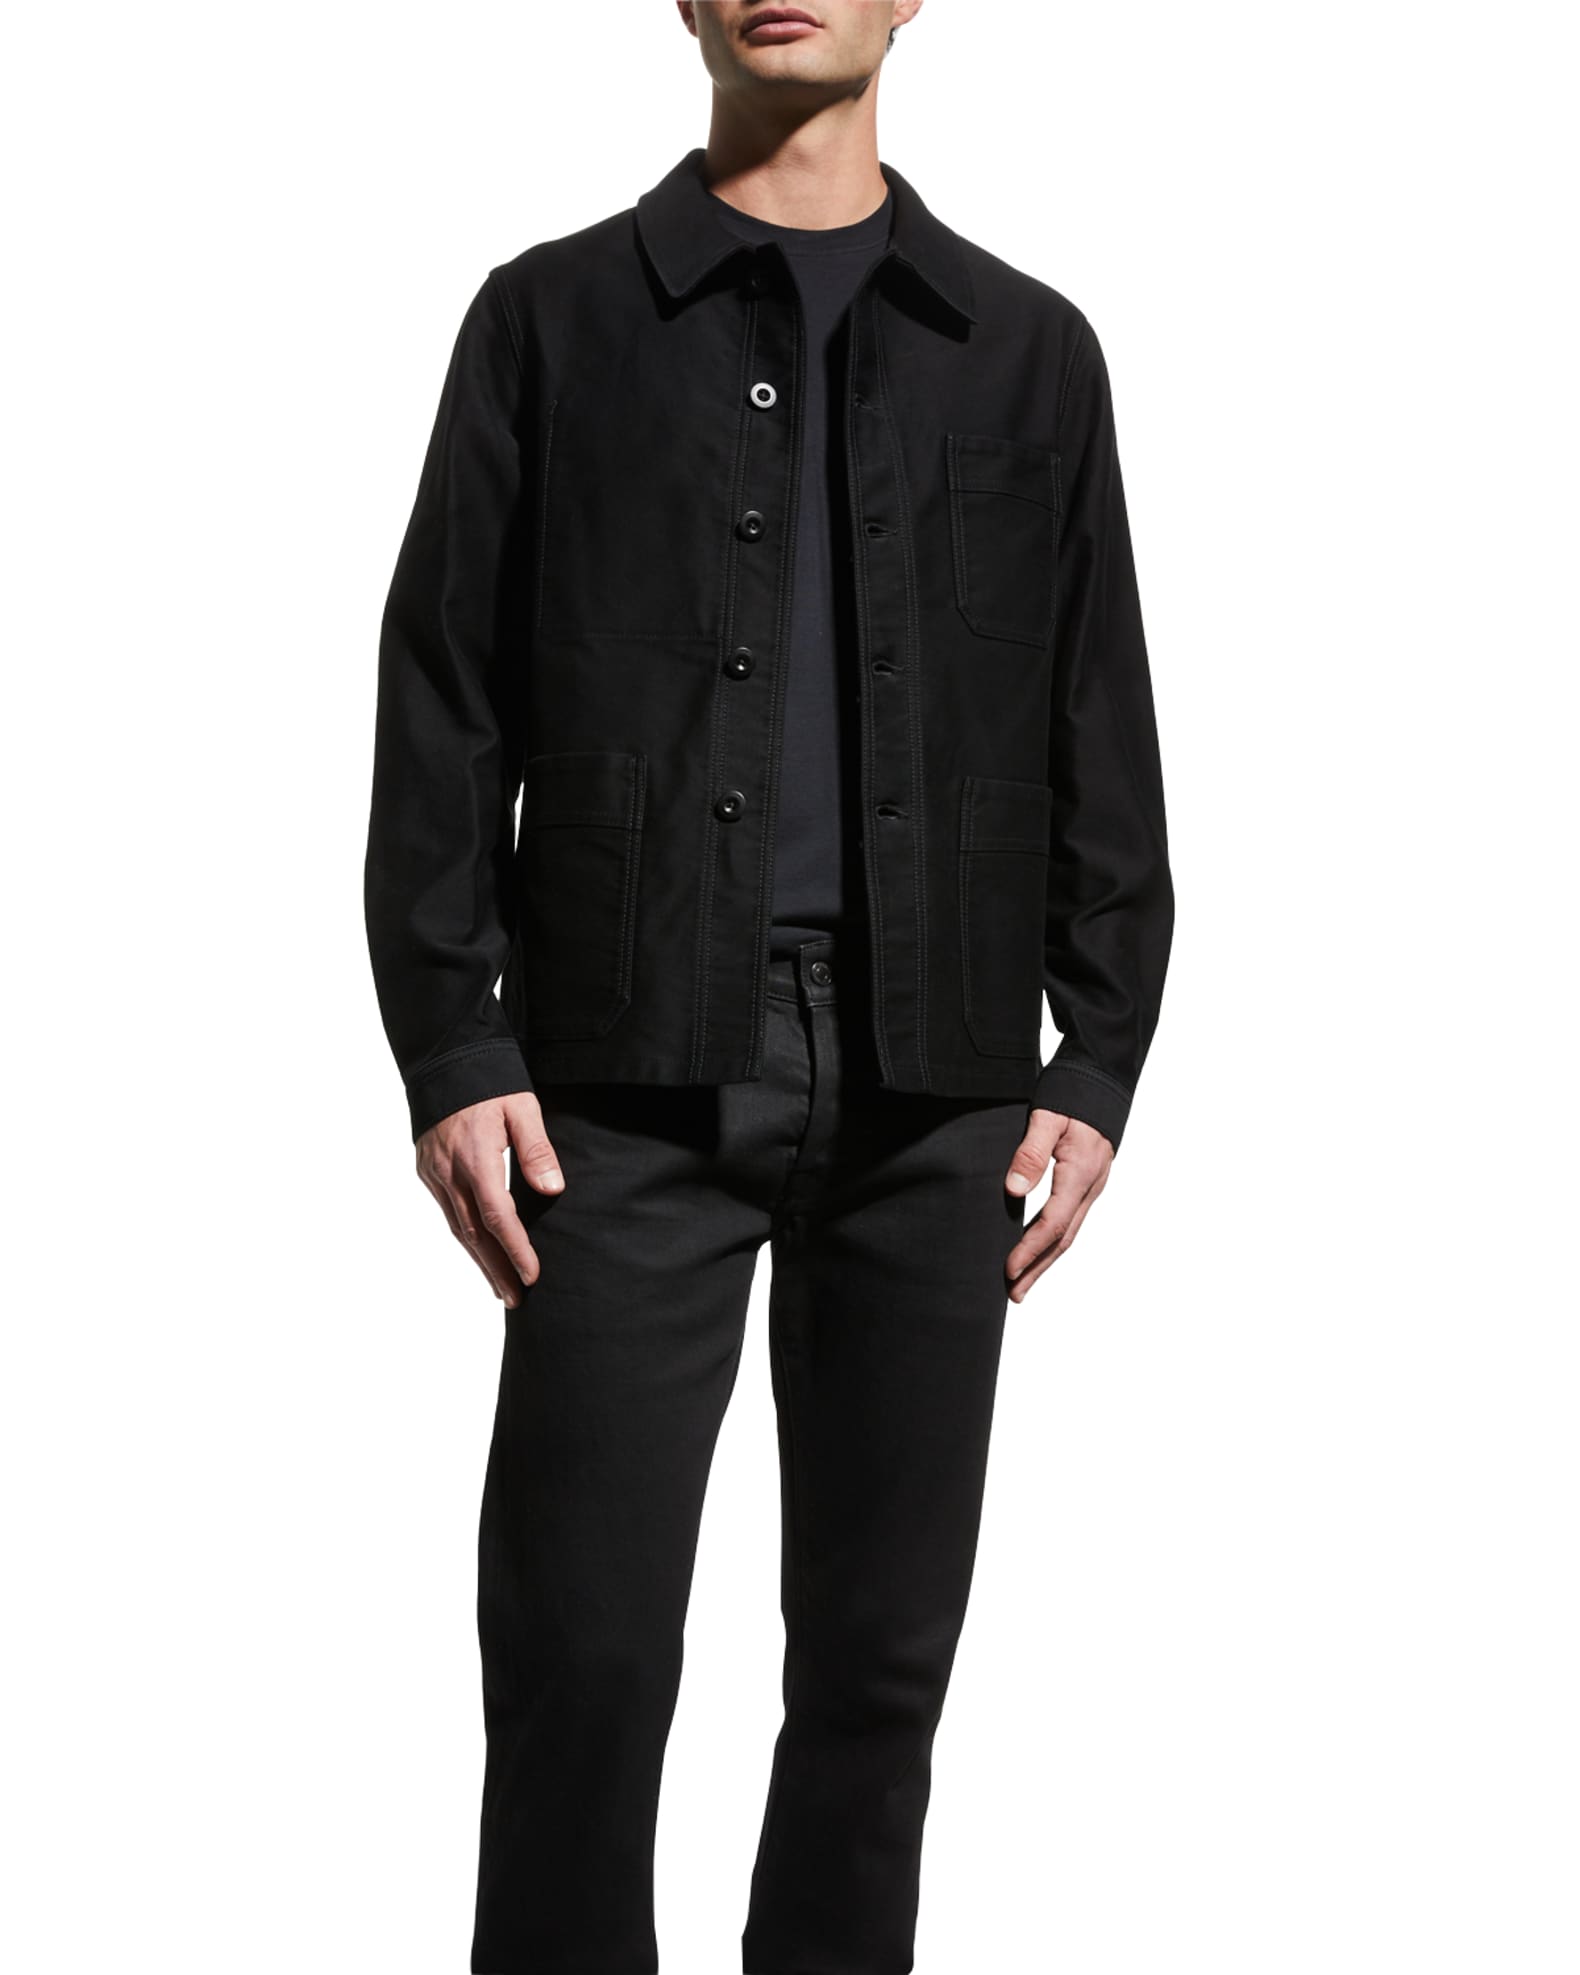 TOM FORD Men's Brushed Cotton Chore Jacket | Neiman Marcus